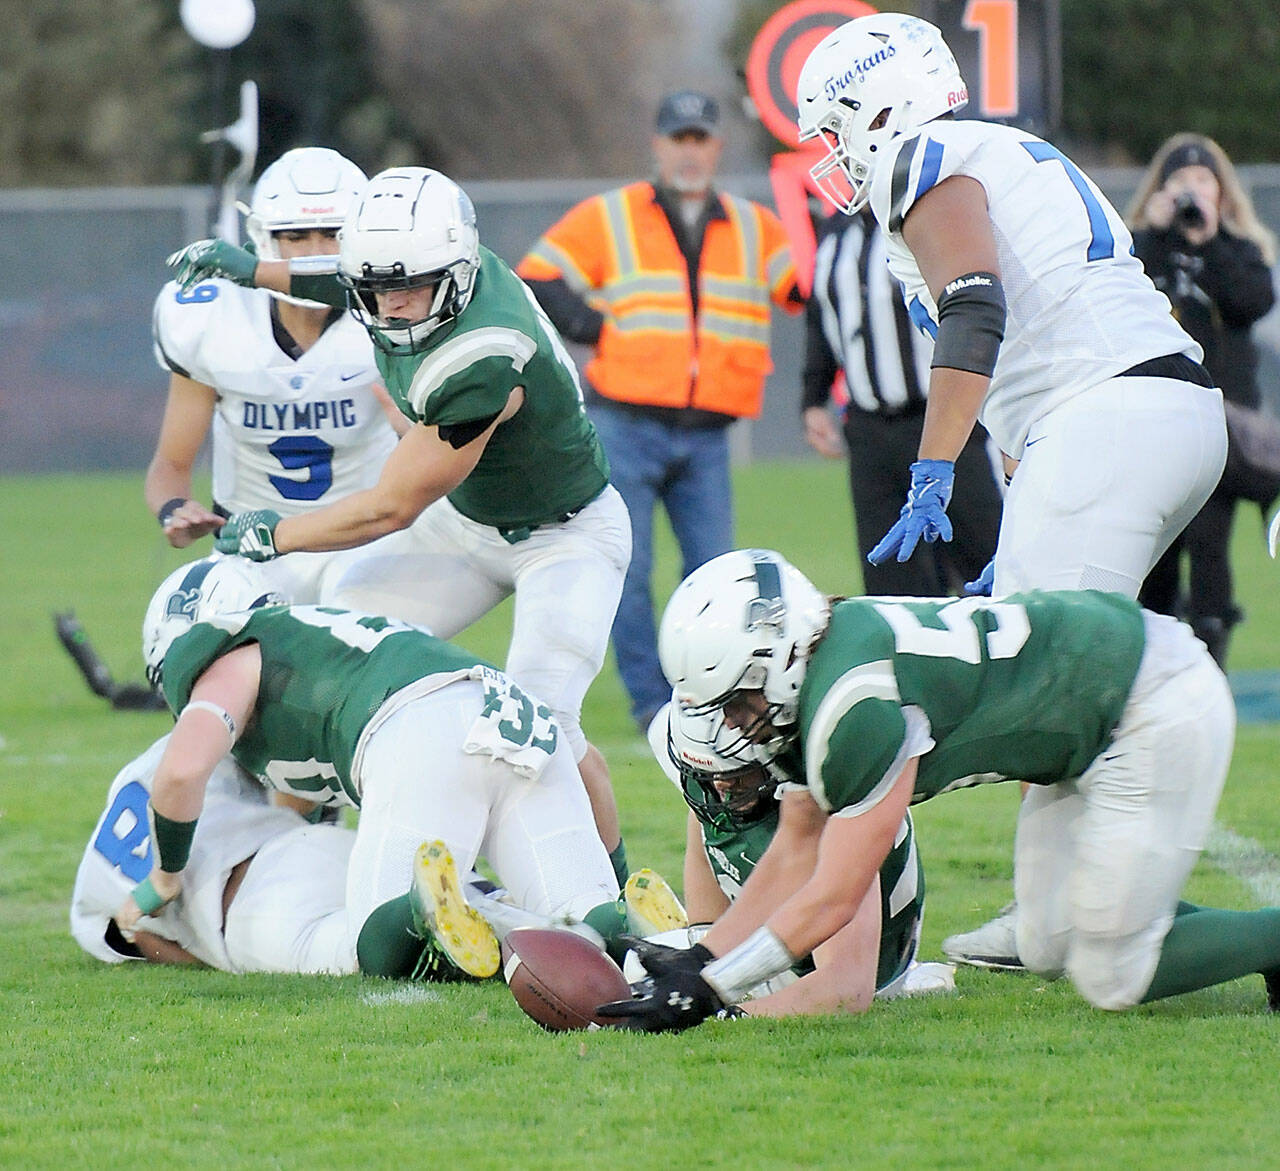 KEITH THORPE/PENINSULA DAILY NEWS Port Angeles’ Tanner Flores, lower right, dives for a fumble knocked loose from Olympic’s Ryan Macazo, lower left by Roughrider Ezra Townsend on Friday at Port Angeles Civic Field. Looking on were, from left, Olympic’s Antonio Castorena, Port Angeles’ Jason Hawes and Olympic’s DeQuan Freeland.